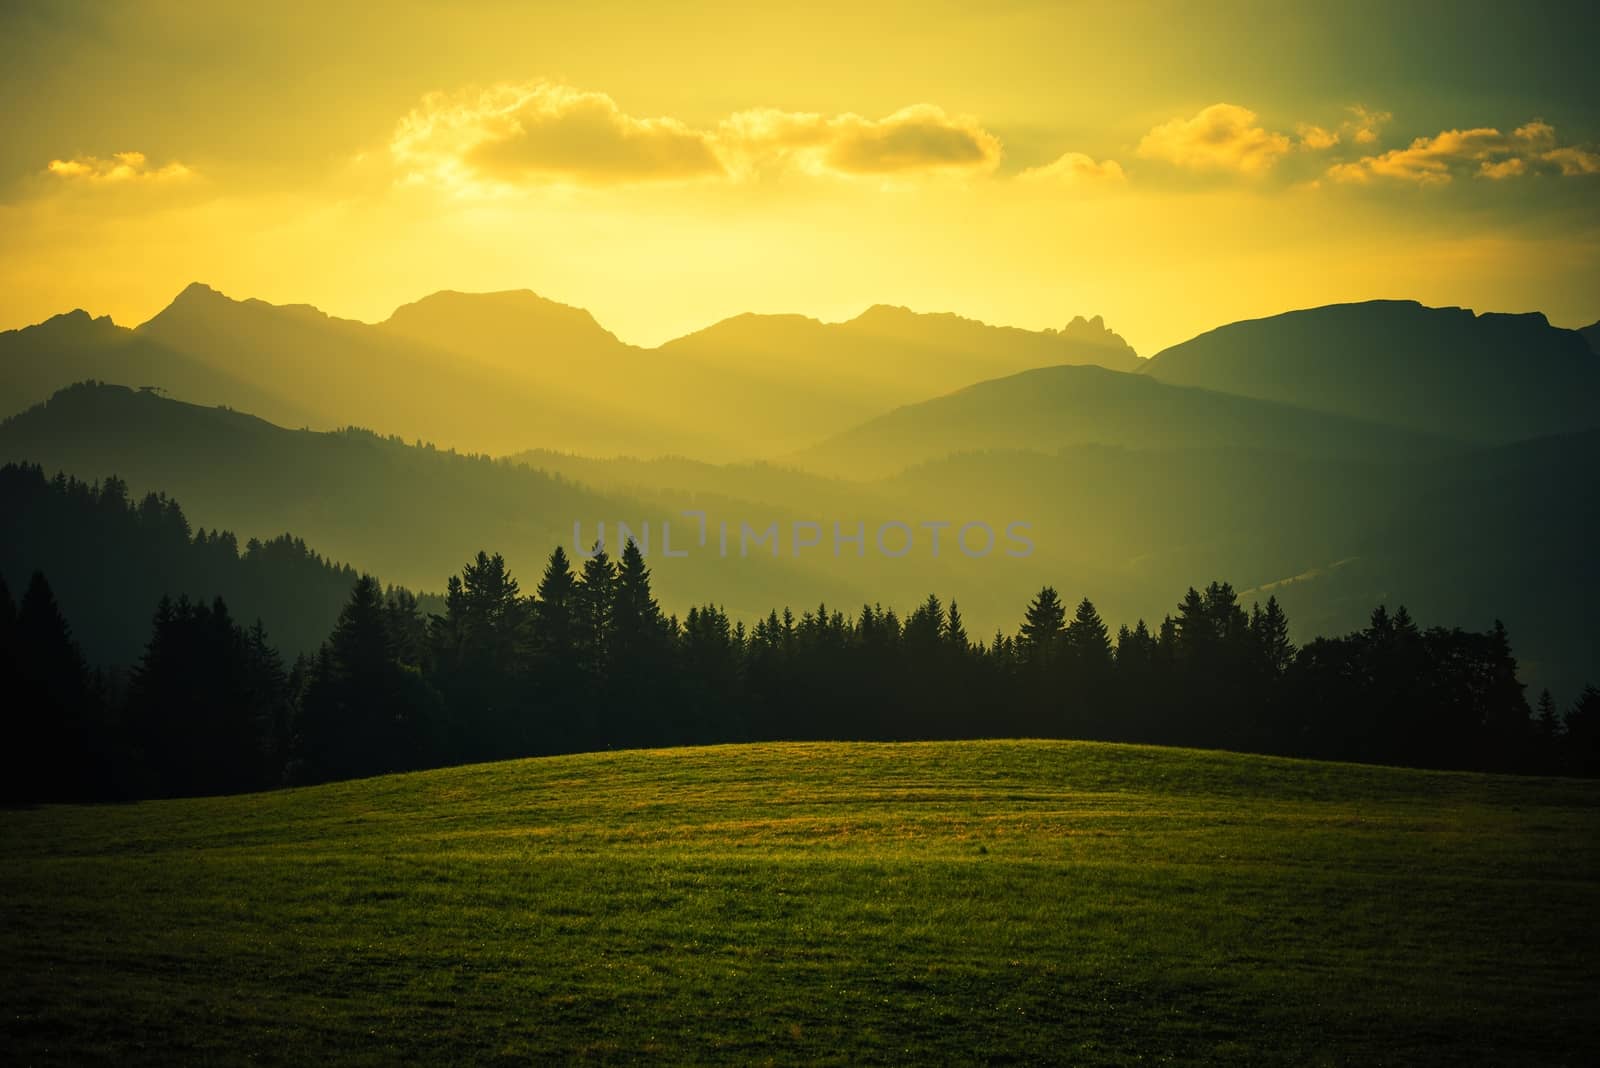 Scenic Mountain Landscape at Sunset. French Alps Megeve, France Area.